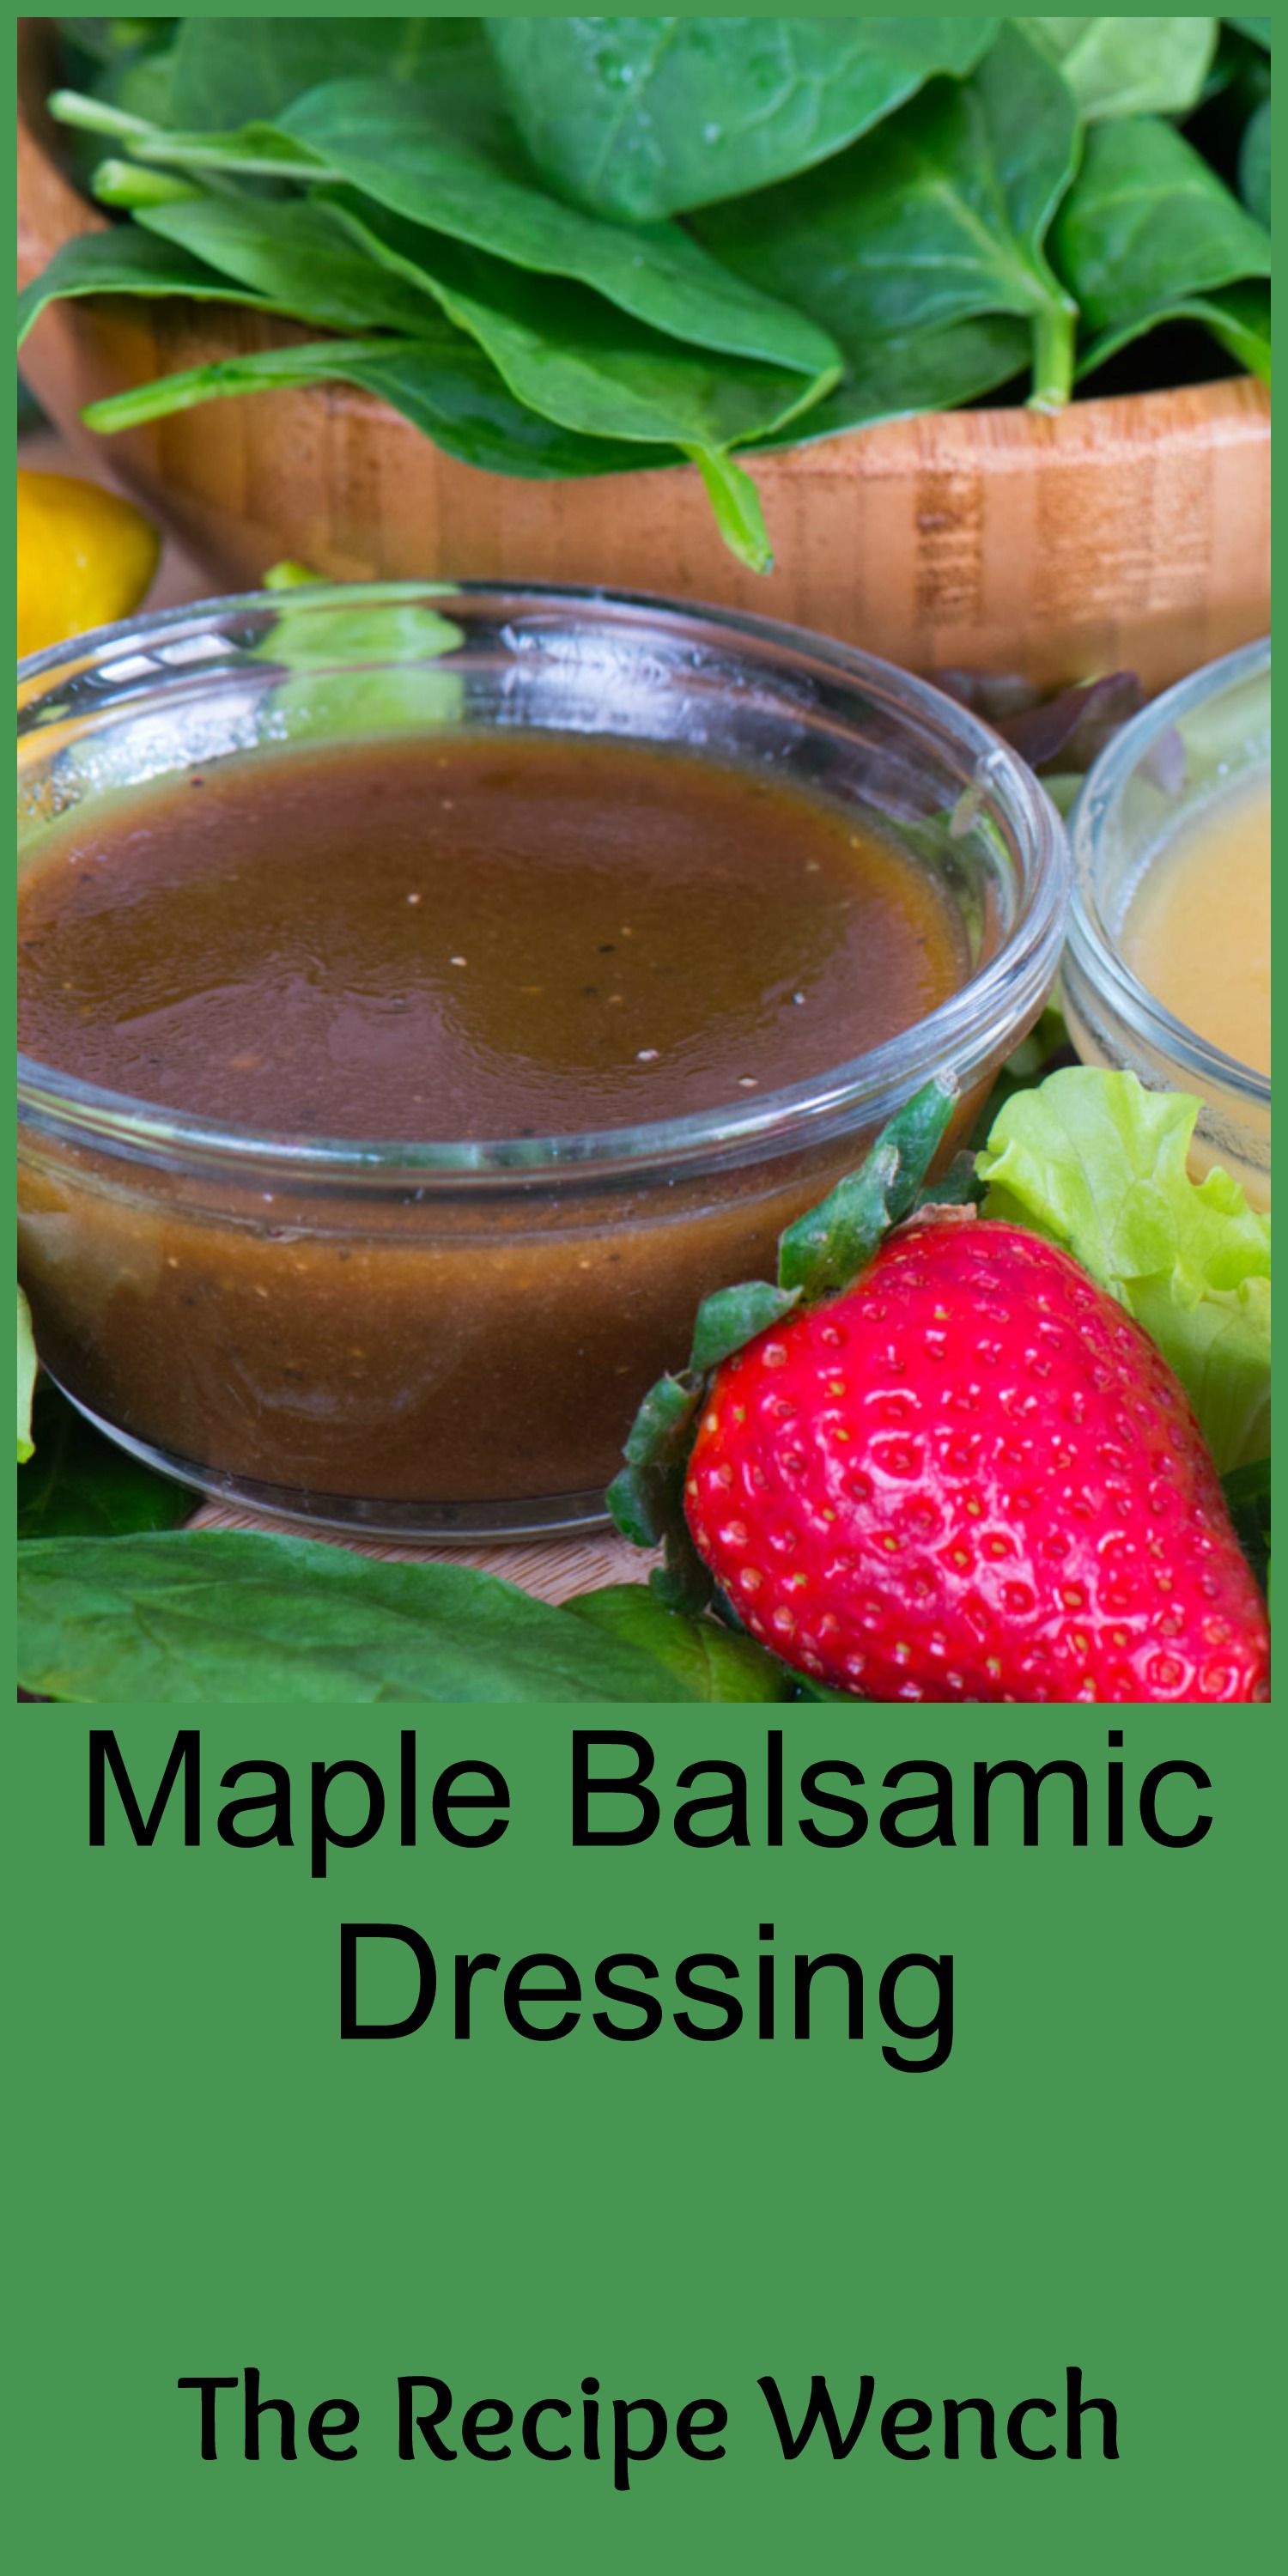 Maple balsamic dressing takes 4 ingredients and 5 minutes. Why buy? | The Recipe Wench